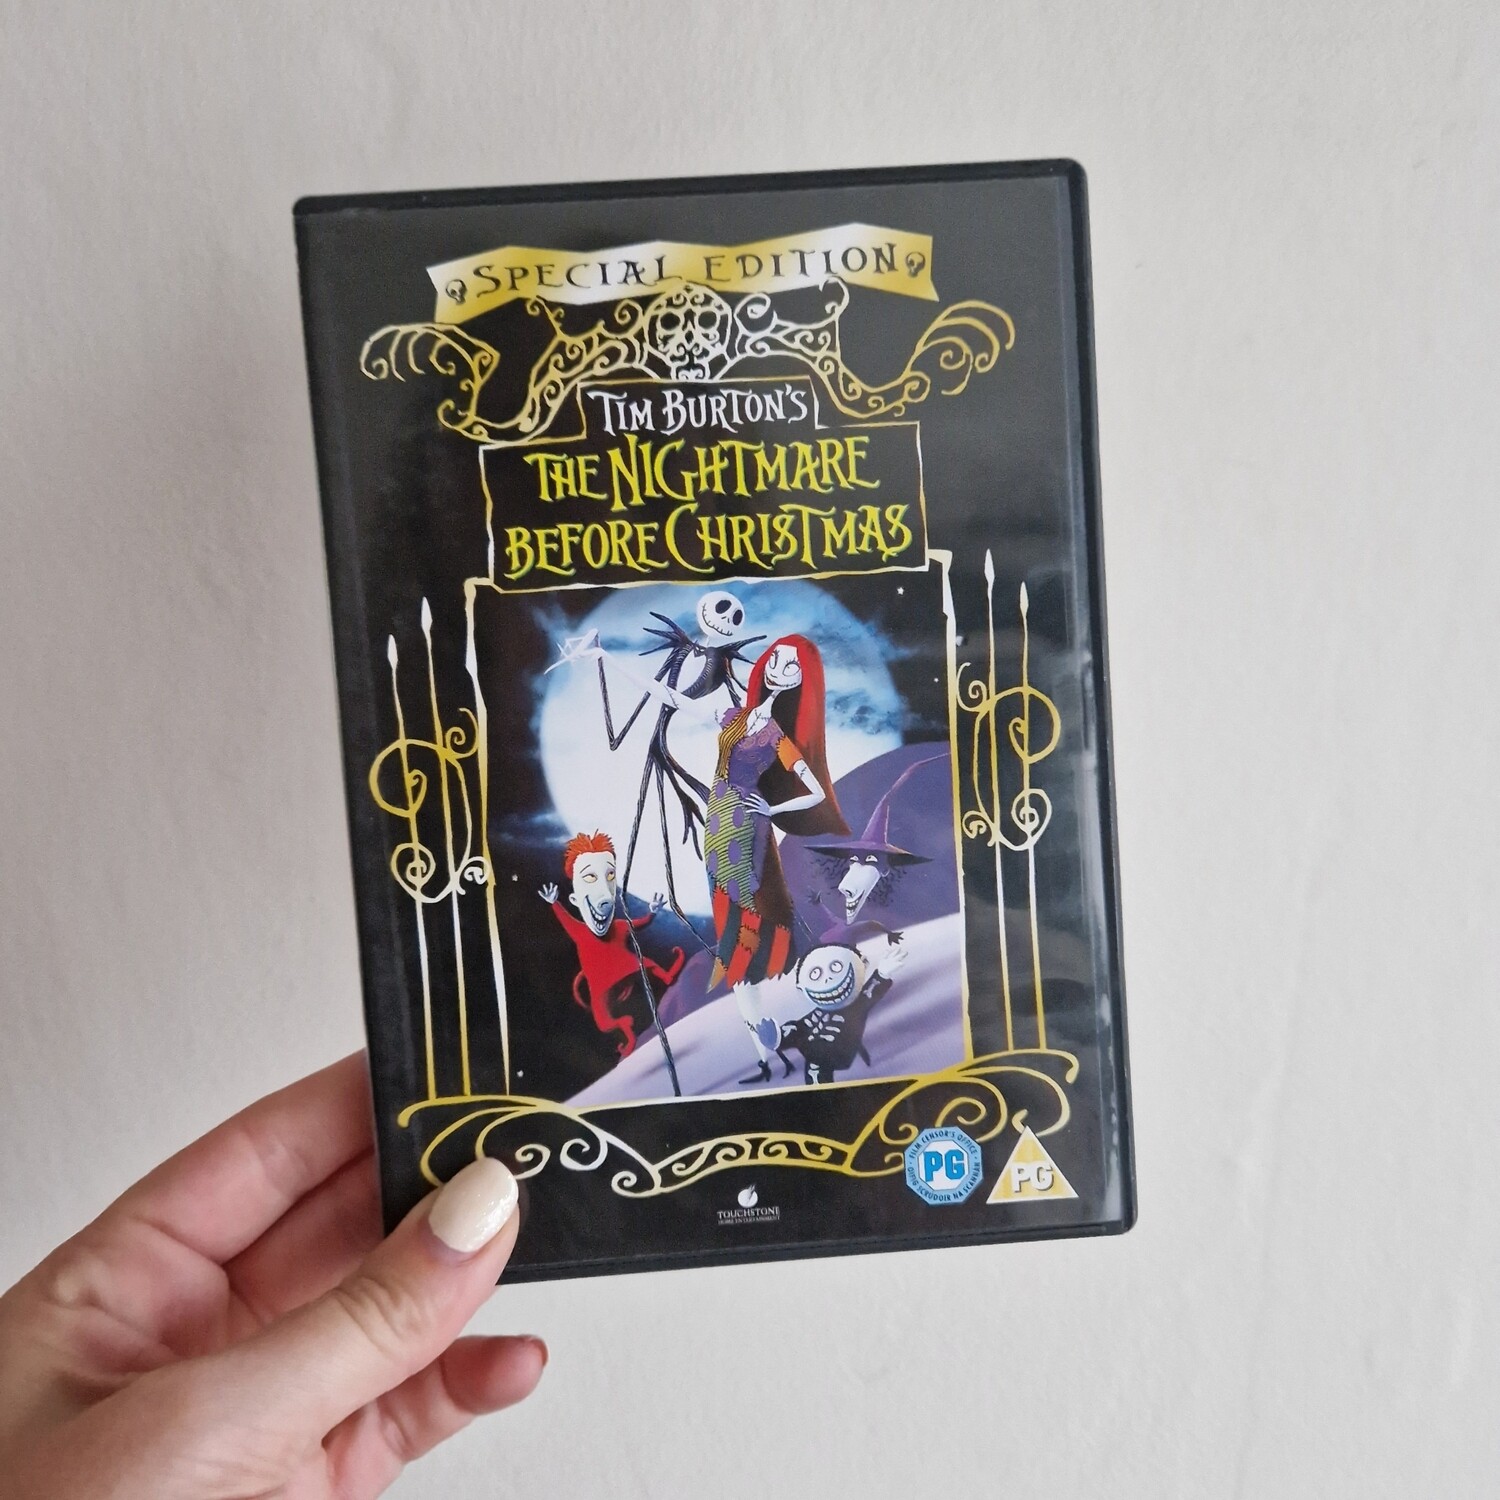 The Nightmare Before Christmas DVD Notebook